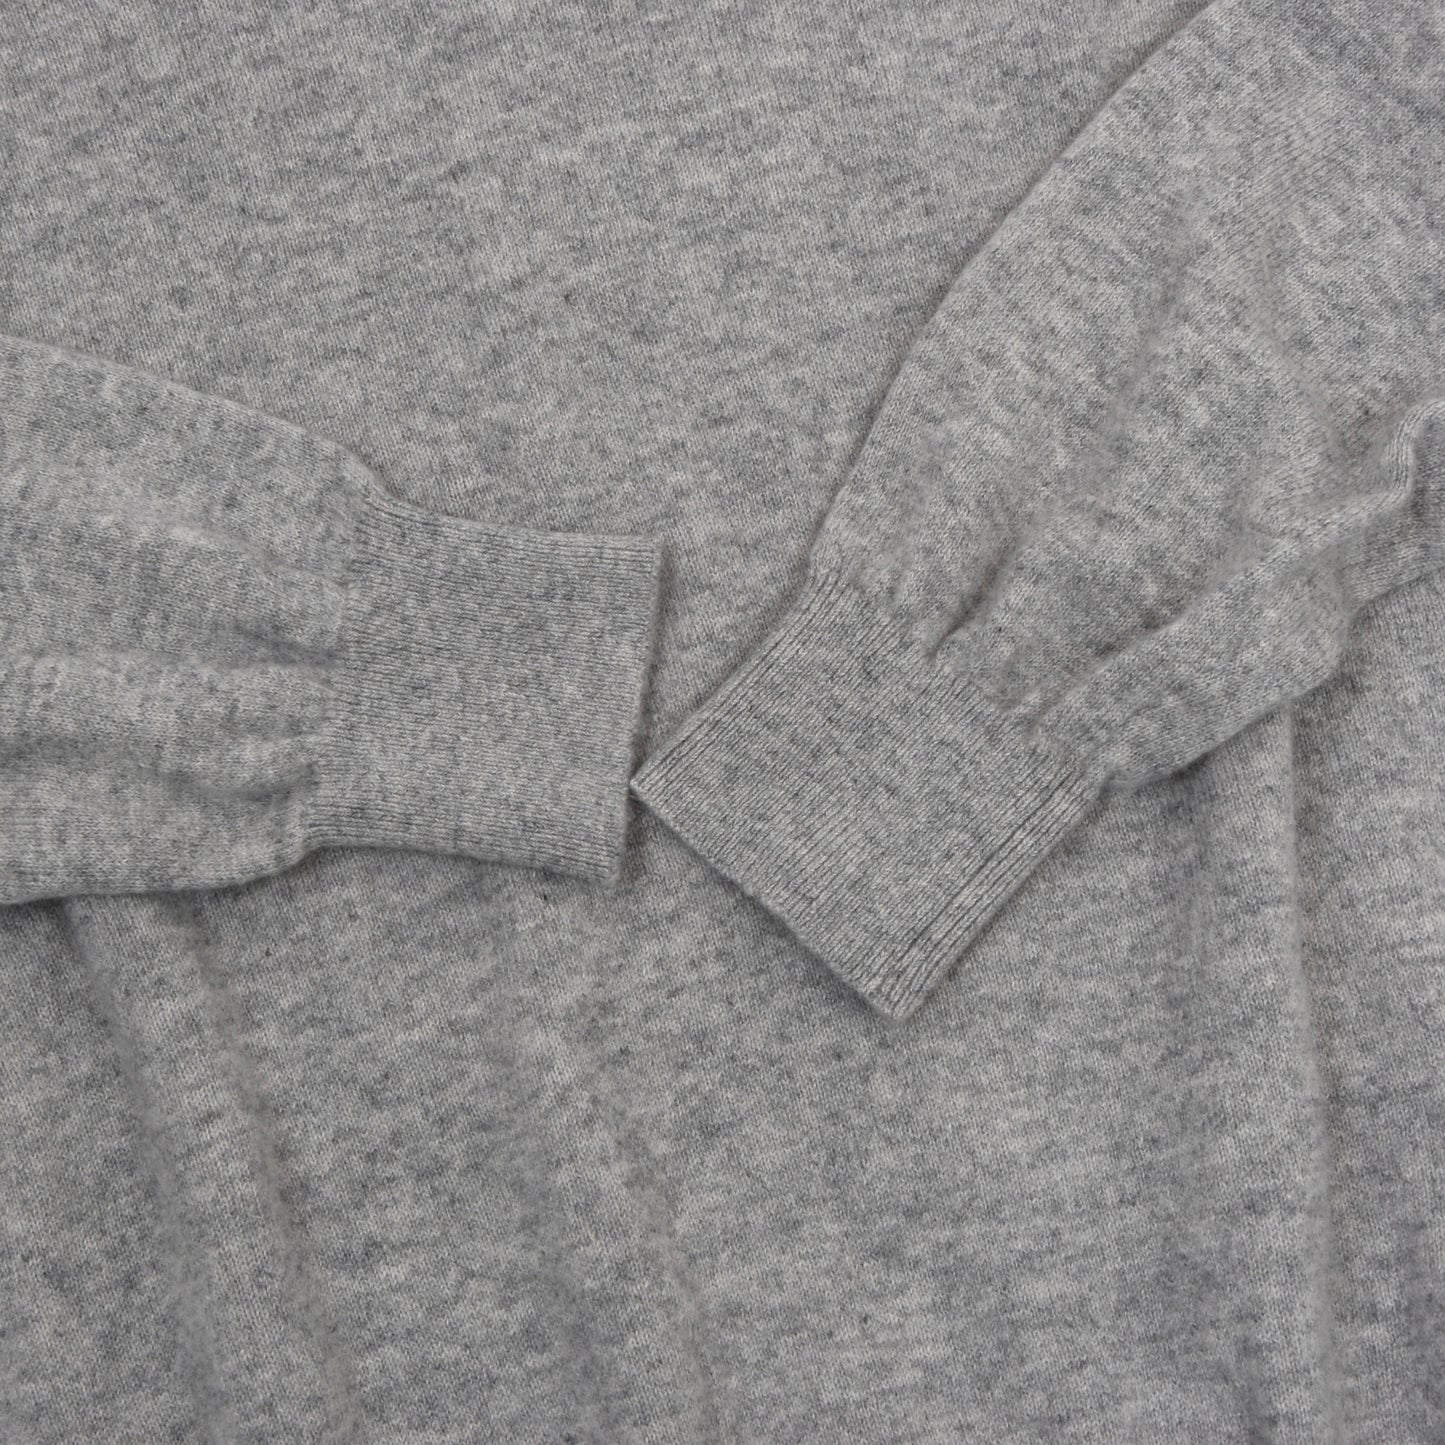 Greenfield Classic 100% Cashmere Sweater Size 3XL - Heather Grey